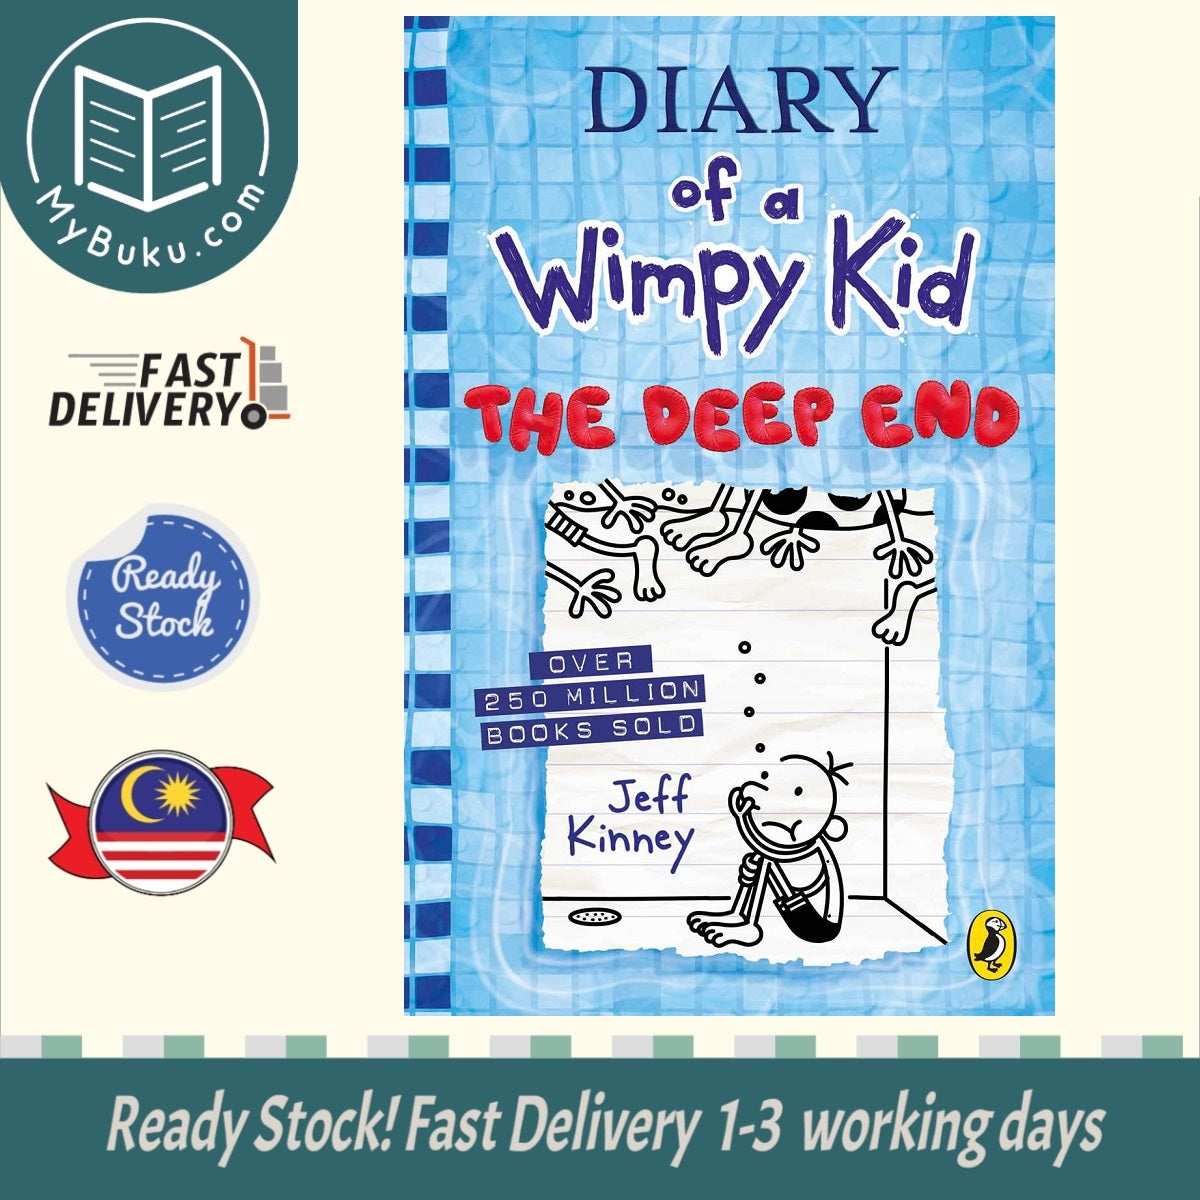 9780241396957　Deep　a　Penguin　(Book　Wimpy　Random　Diary　The　End　of　15)　Childeren　Kid:　House　–